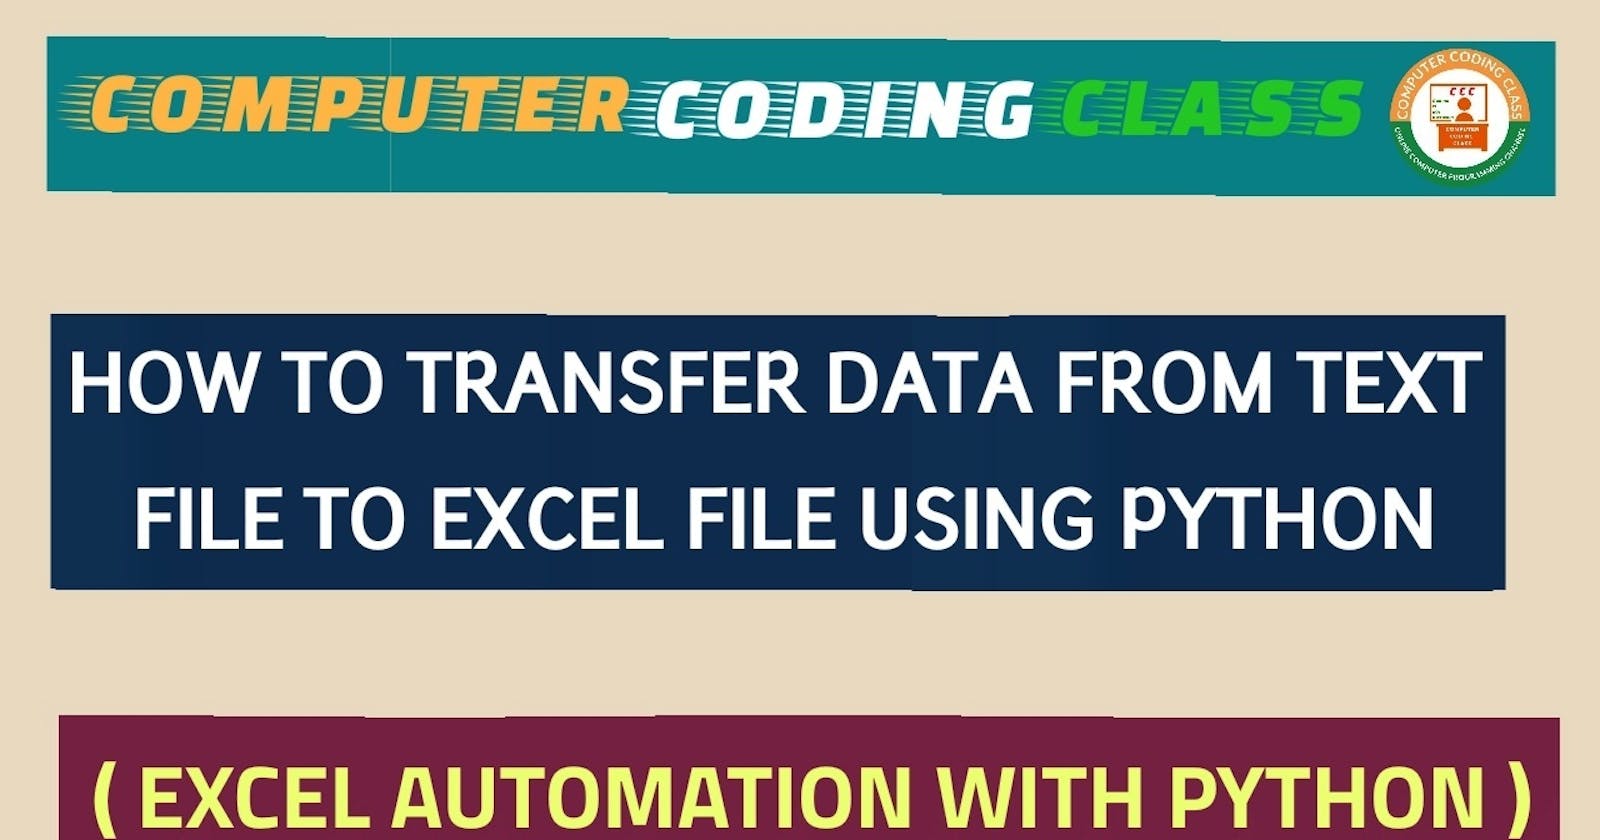 How to Transfer Data from Text File to Excel using Python